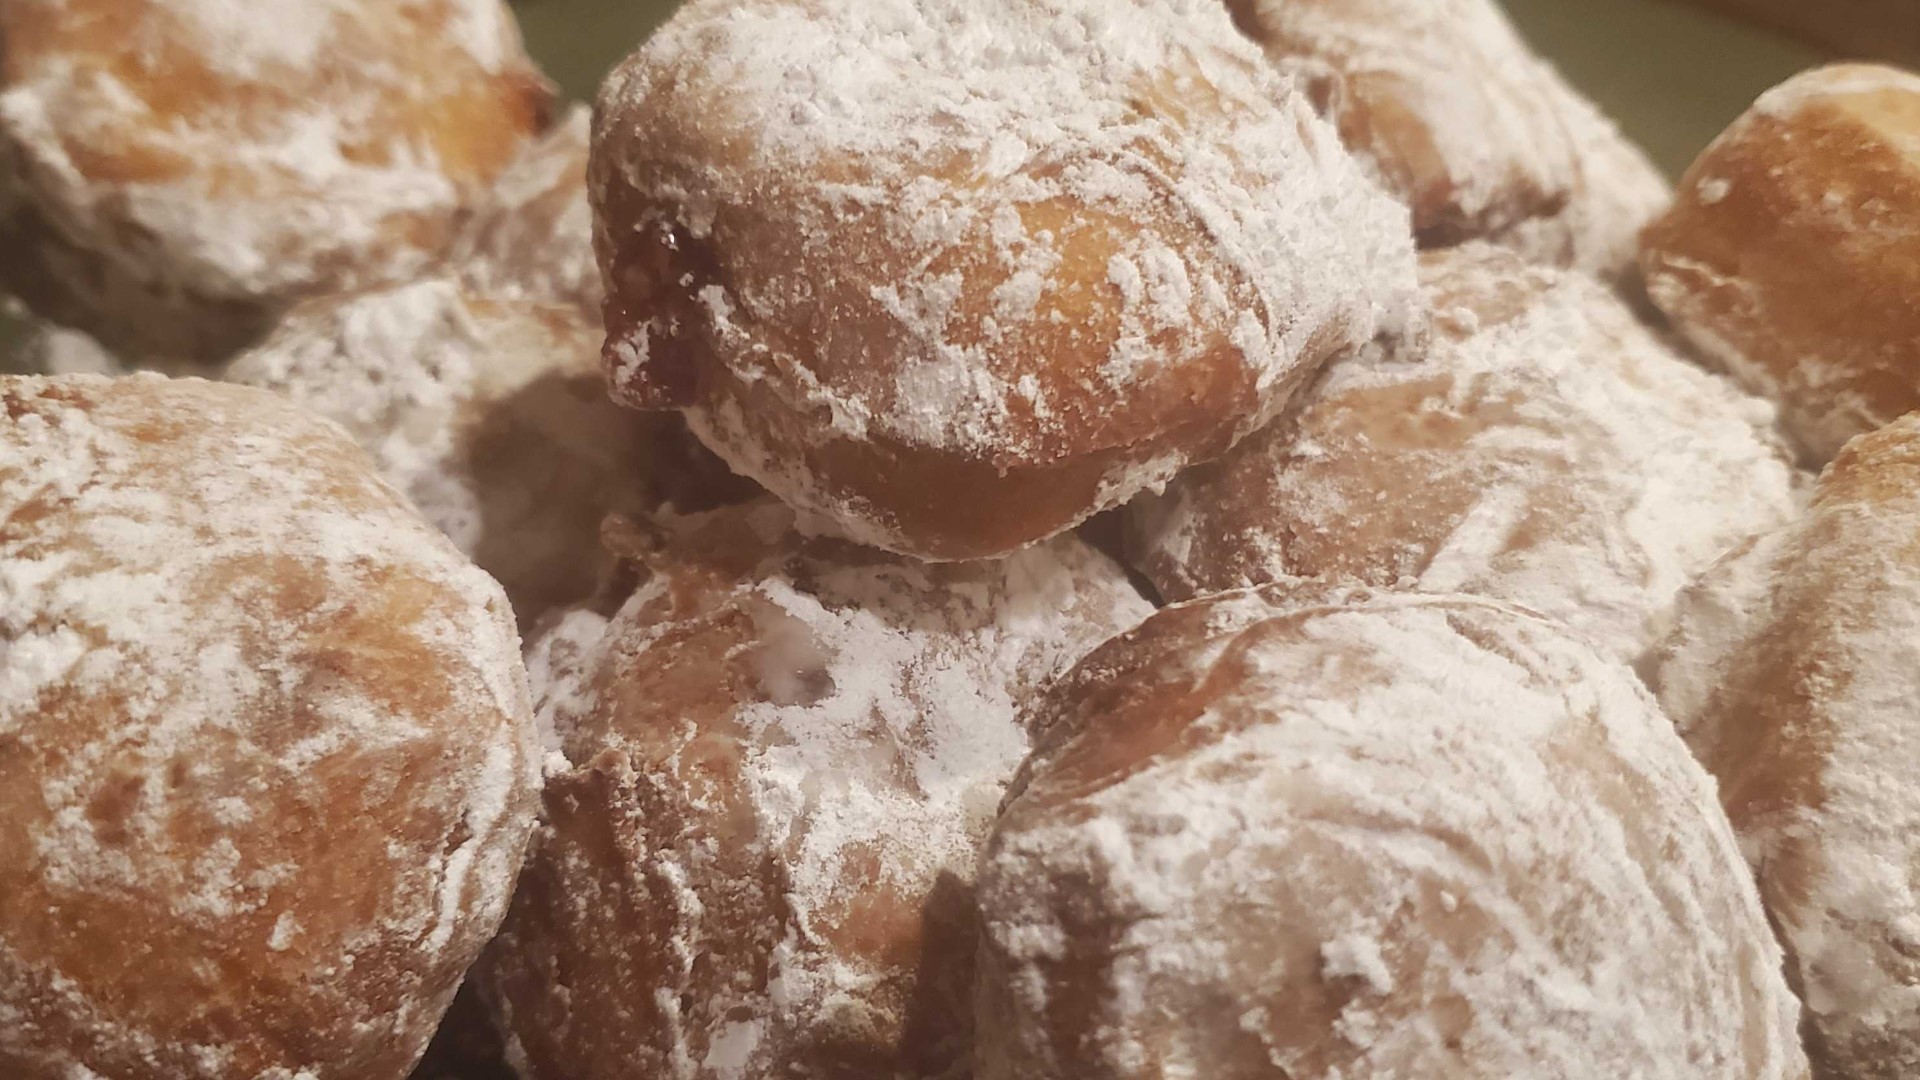 If you've ever wanted to take on the challenge of making homemade paczki - and you have a whole day to do it - here's what you need to get started.